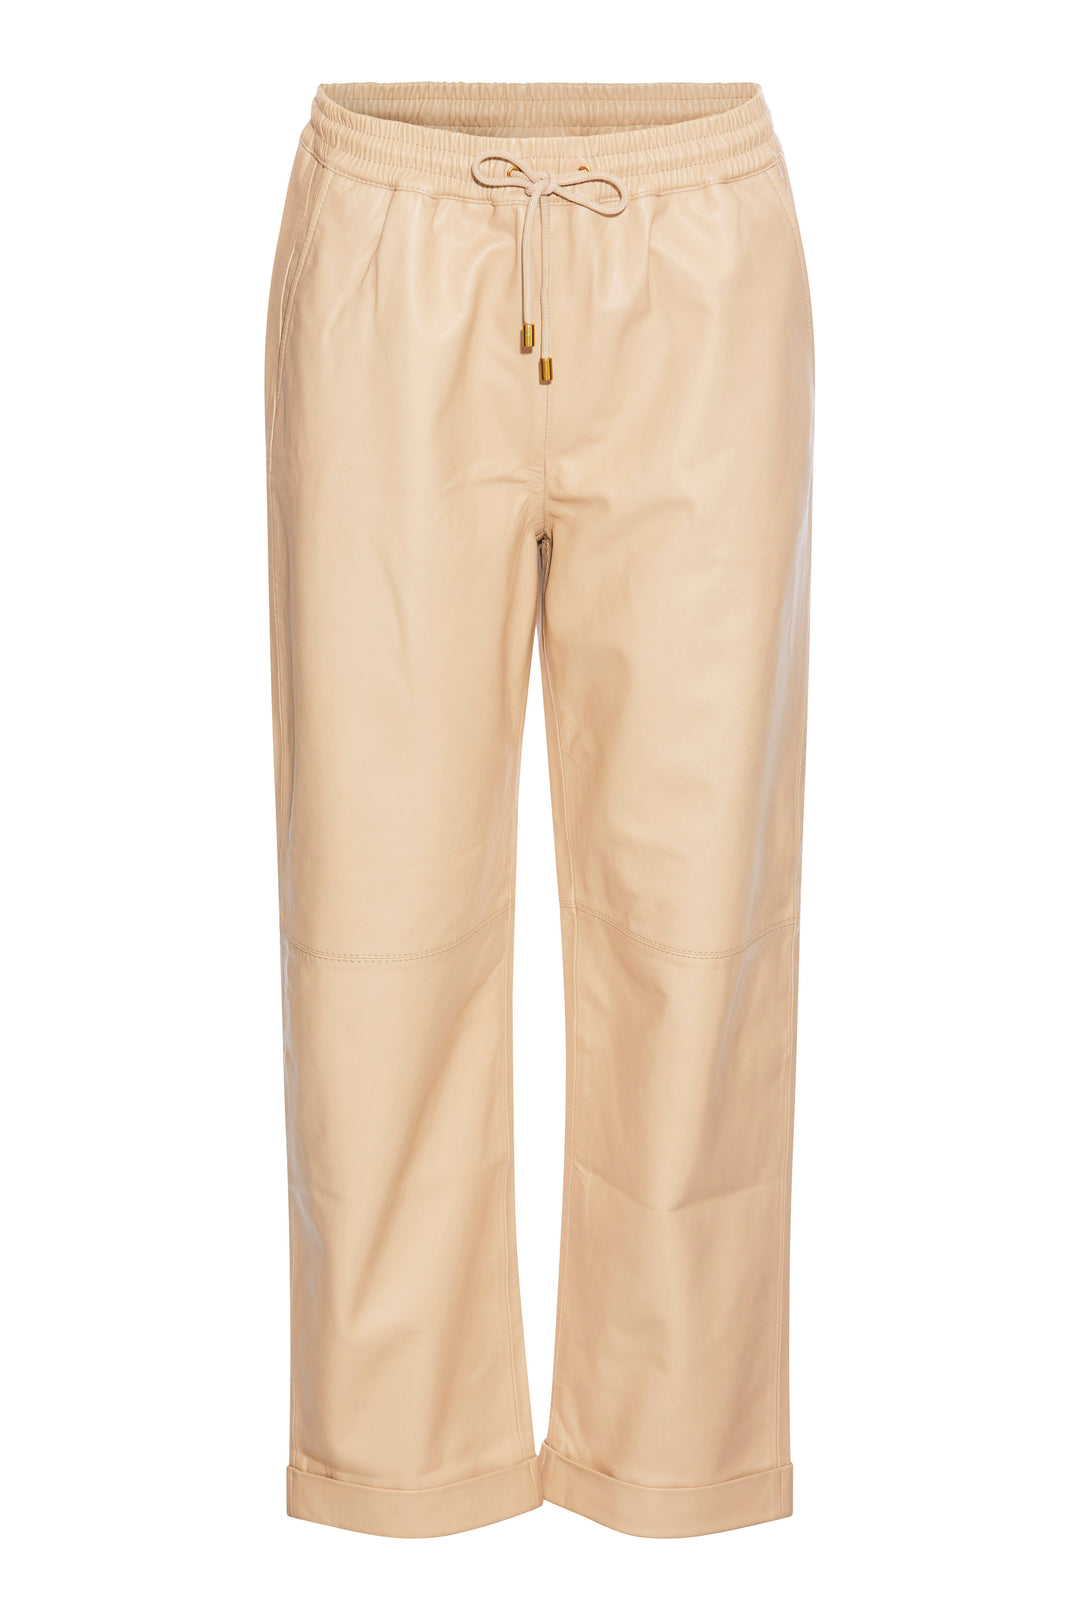 PBO Pug leather pants TROUSERS 178 Ivory cream